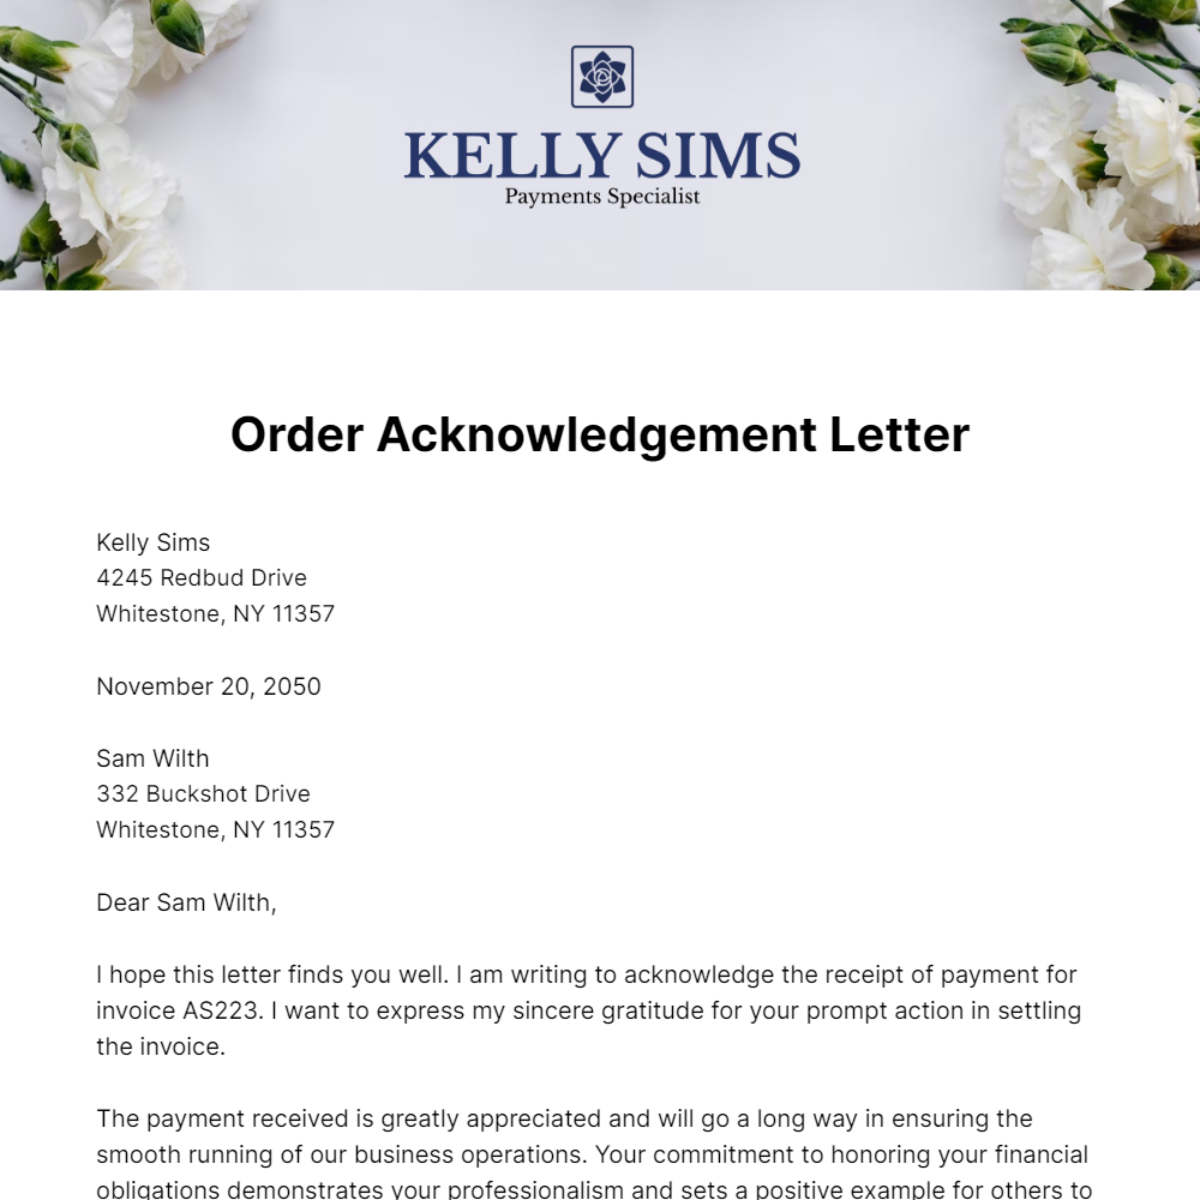 Order Acknowledgement Letter Template